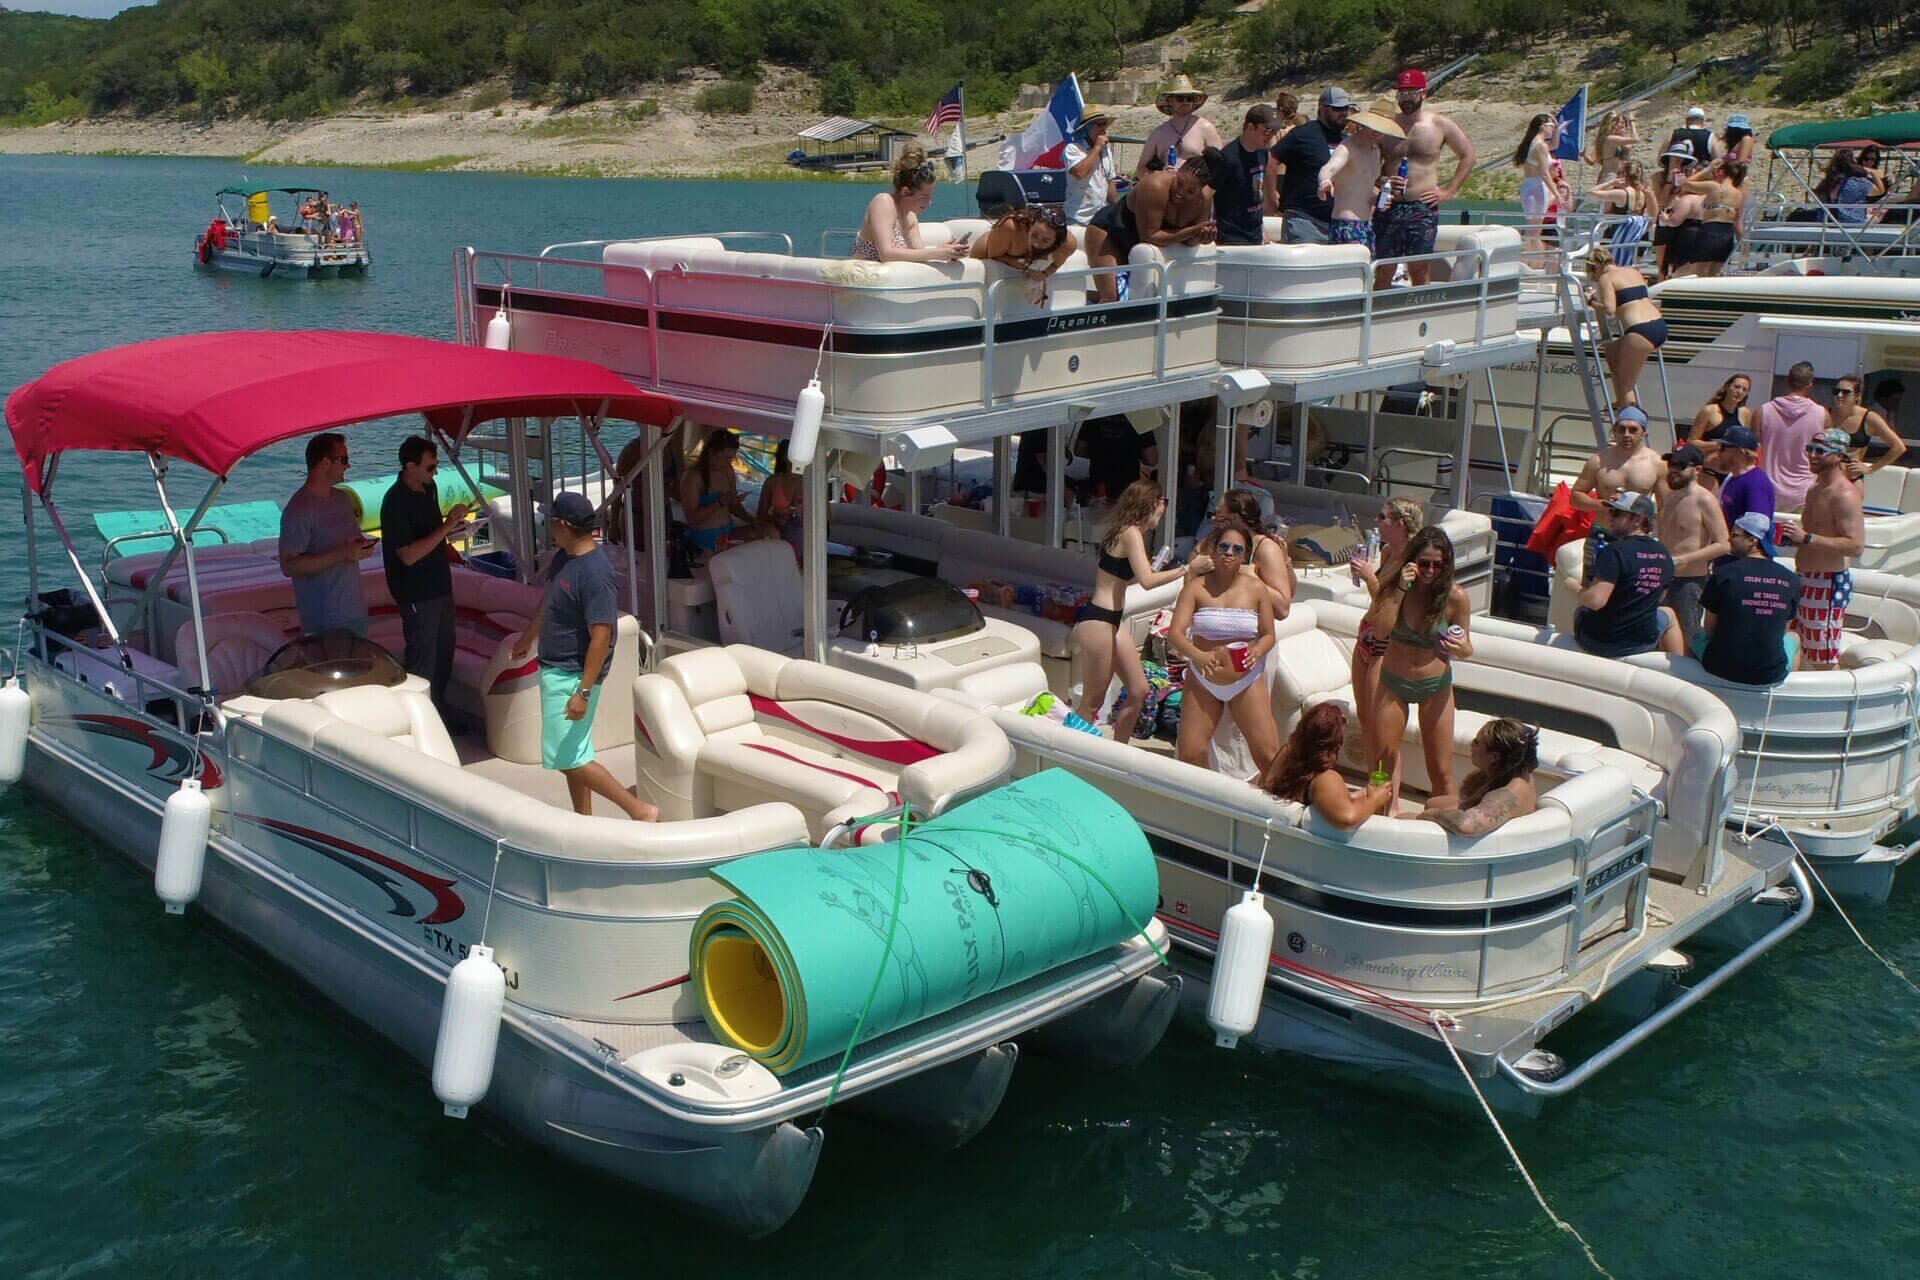 Party boats at Devil's Cove on Lake Travis in Austin, Texas.